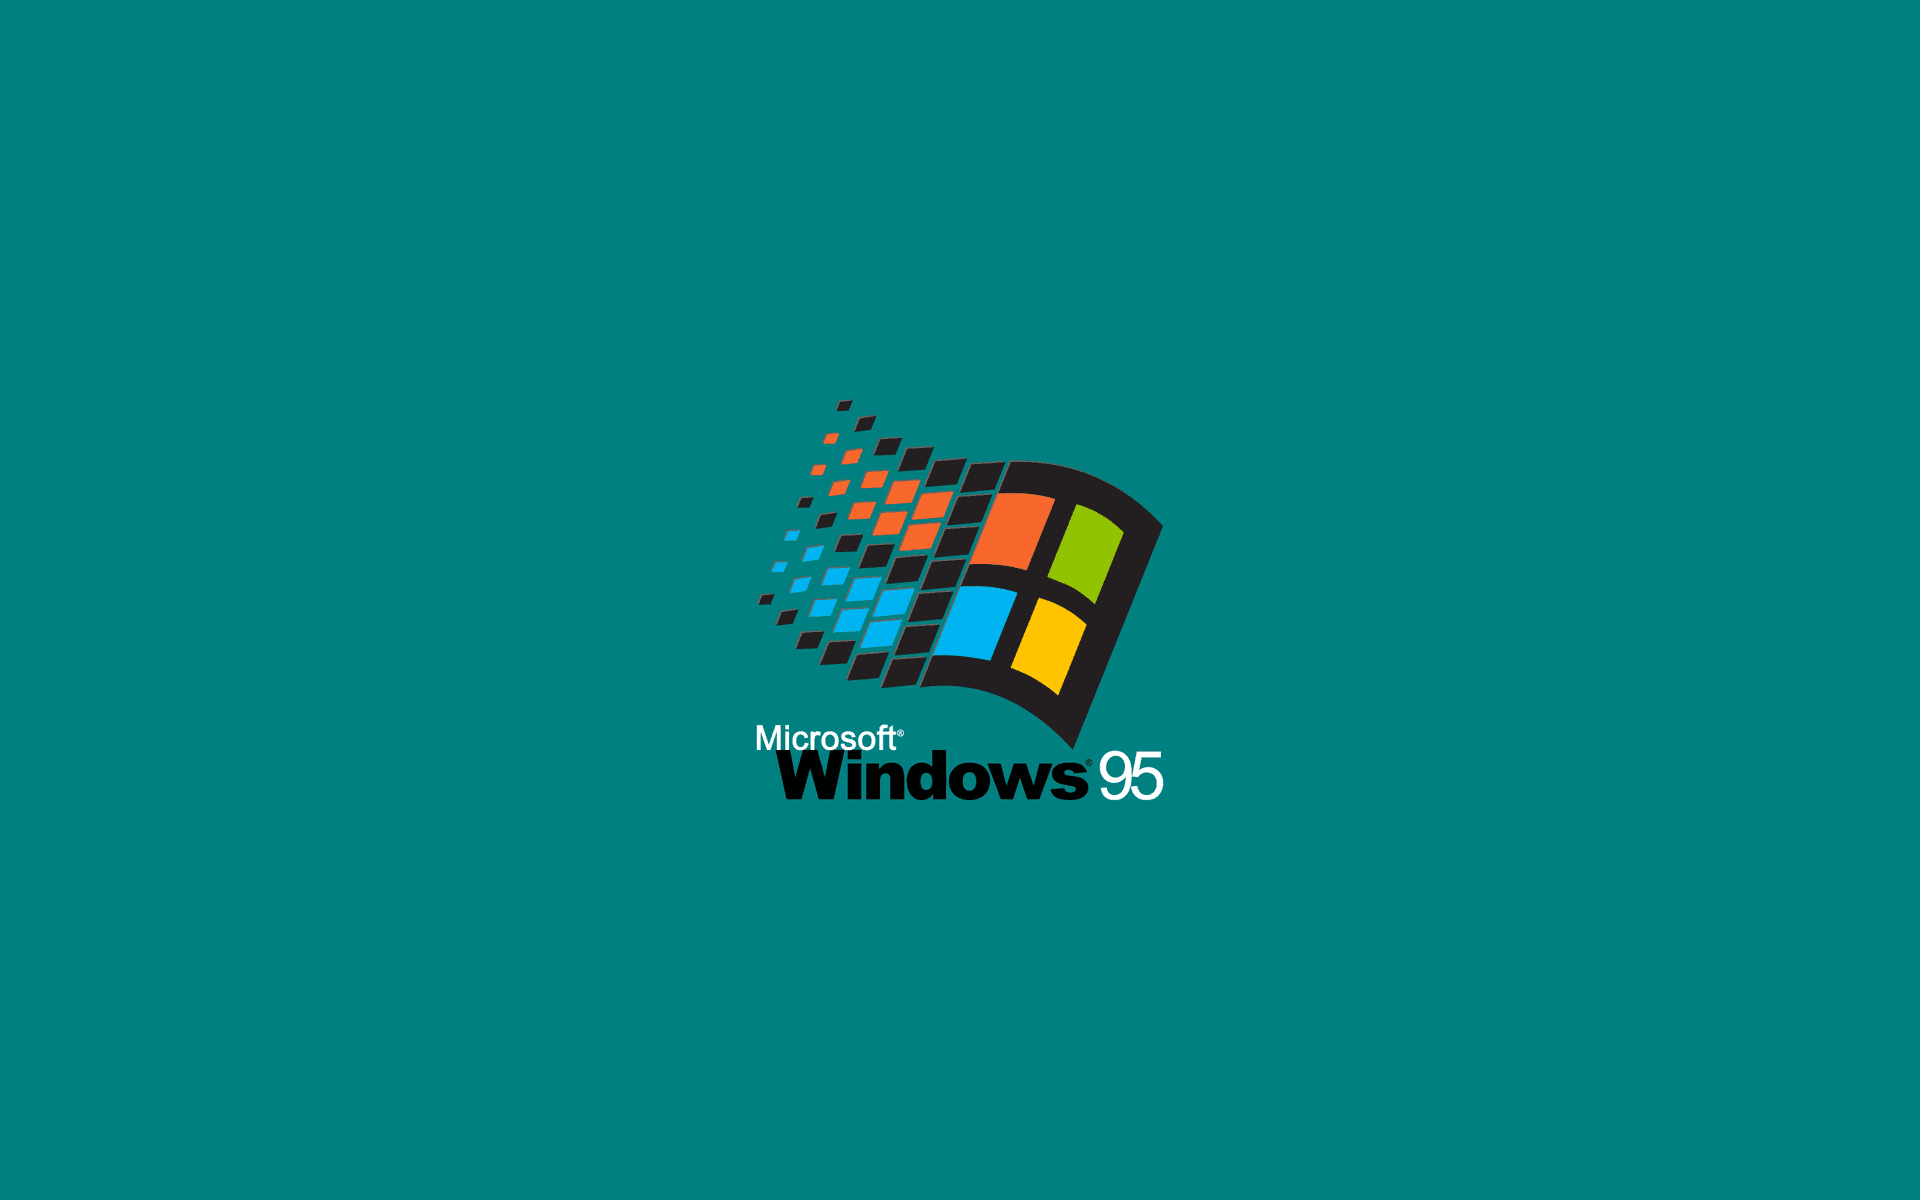 Relive the glory days with the classic Windows 95 background.